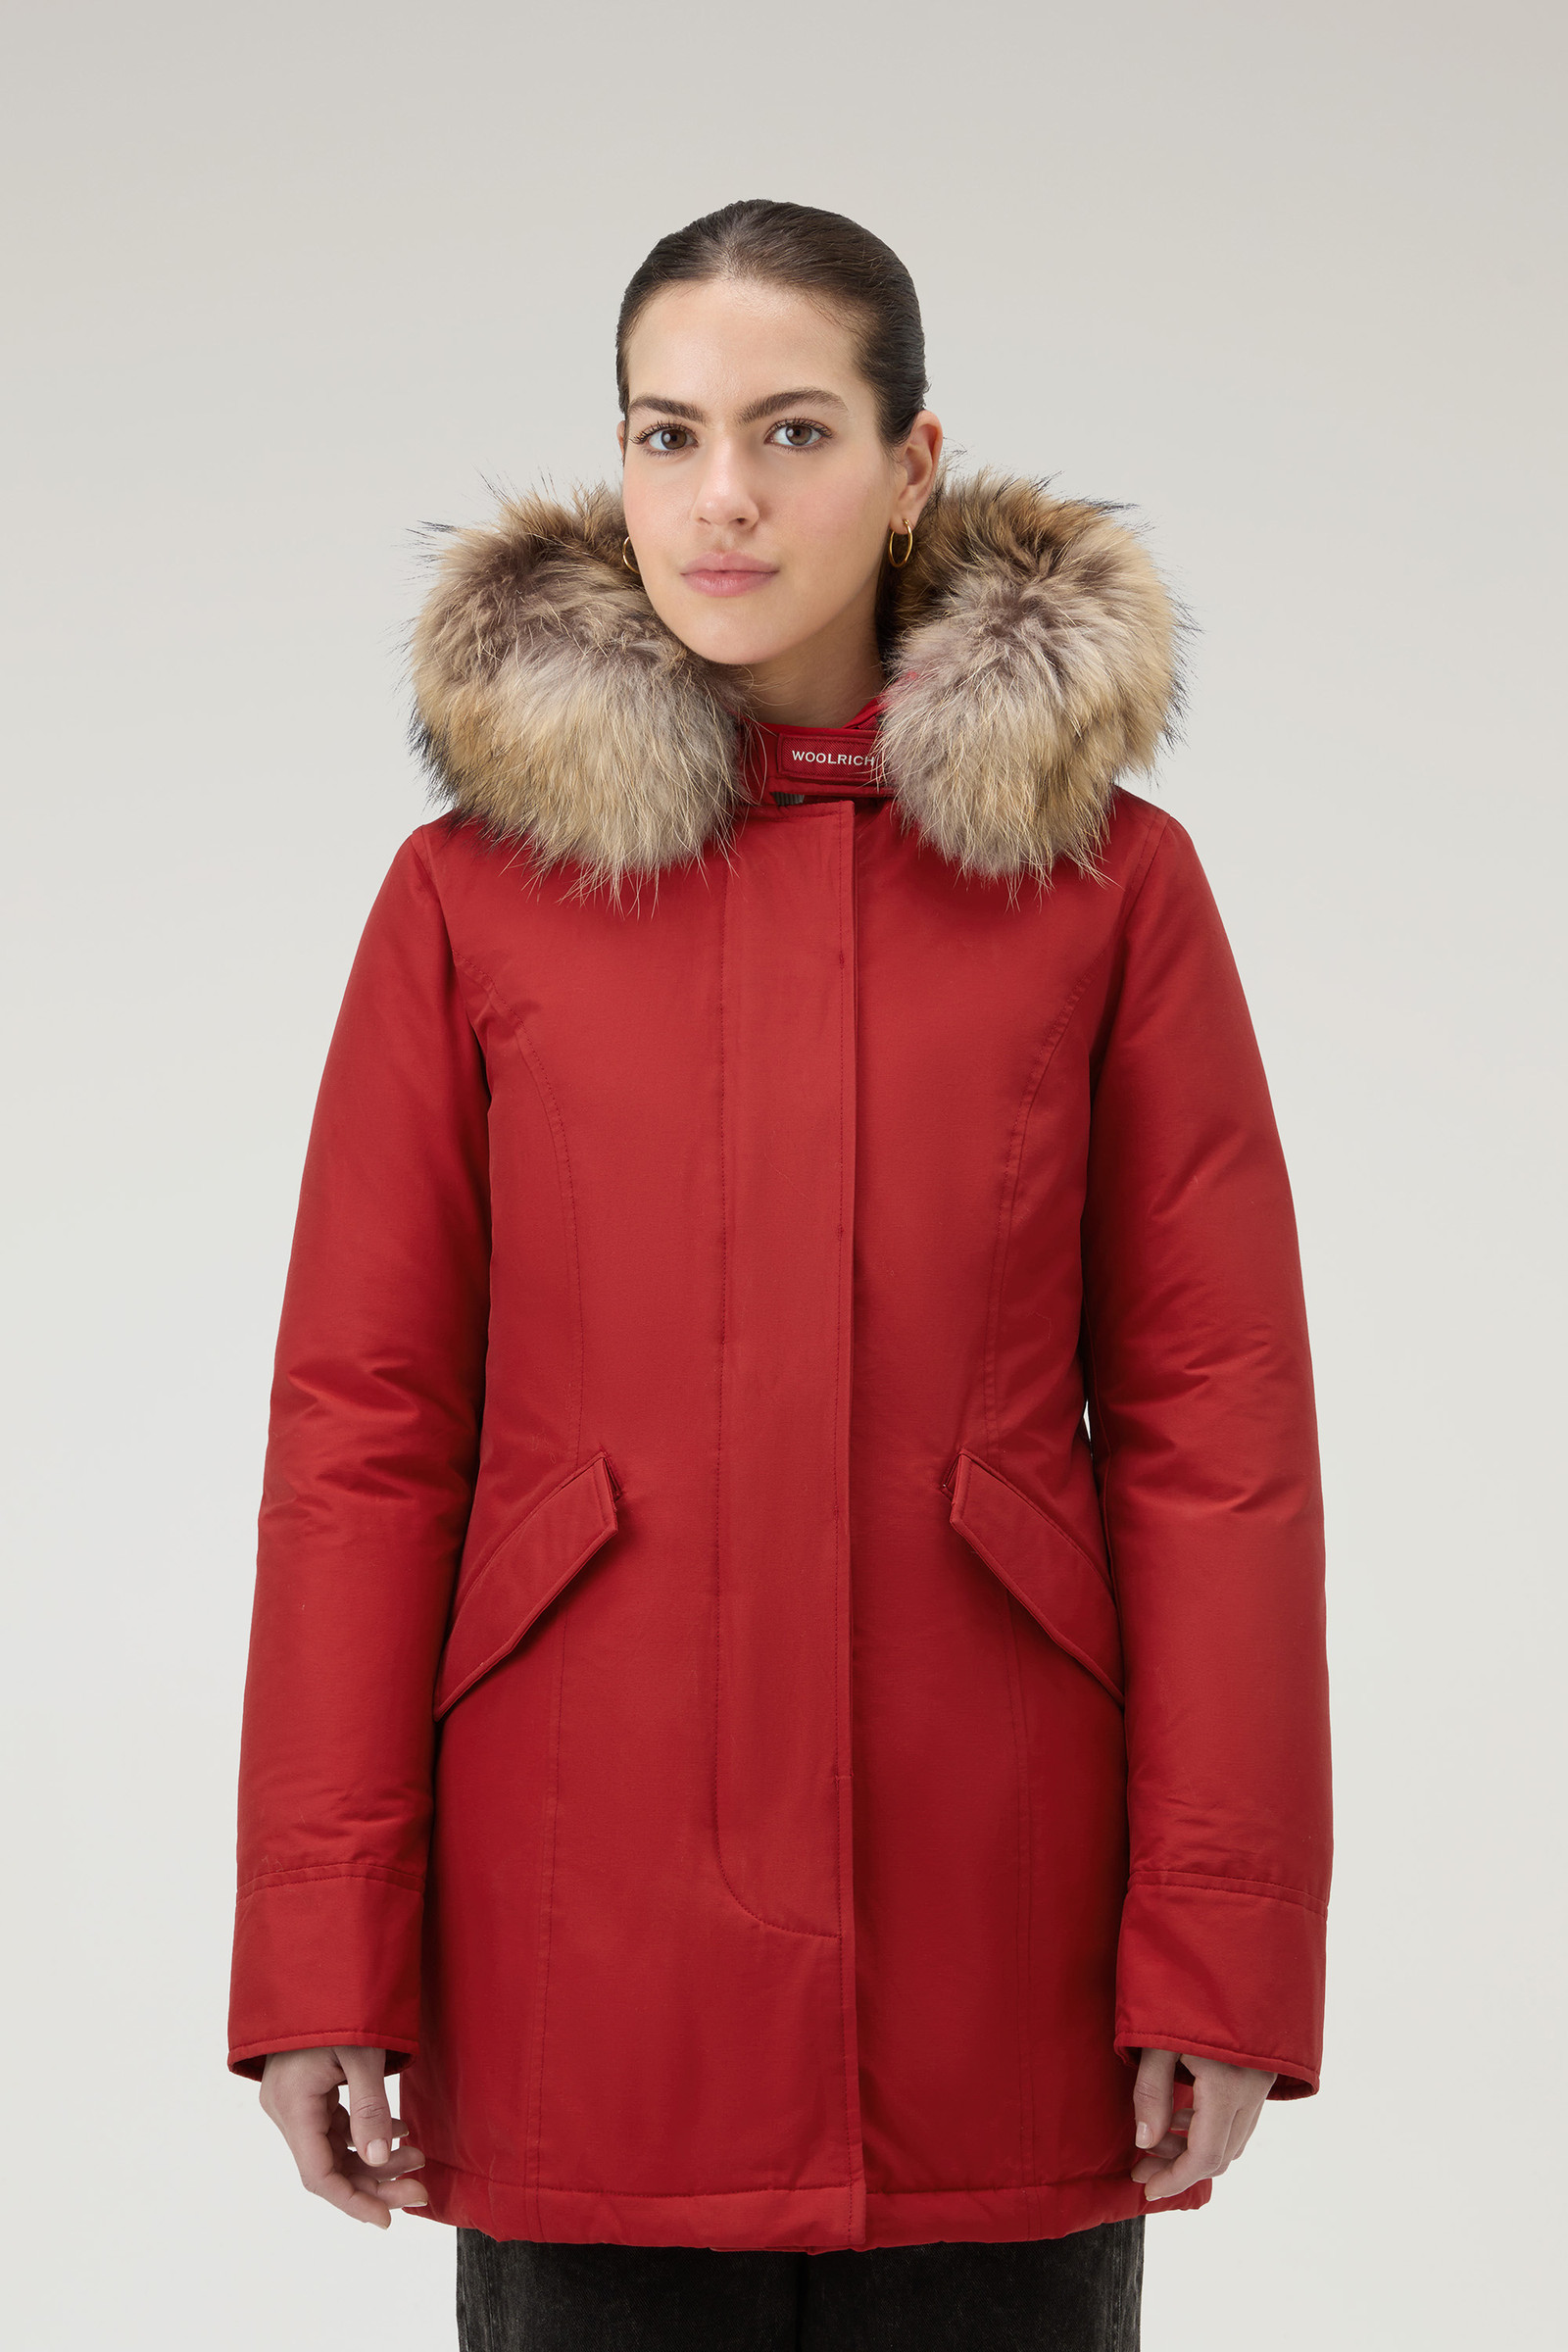 Women's Arctic Parka in Ramar Cloth with Detachable Fur Trim Red ...